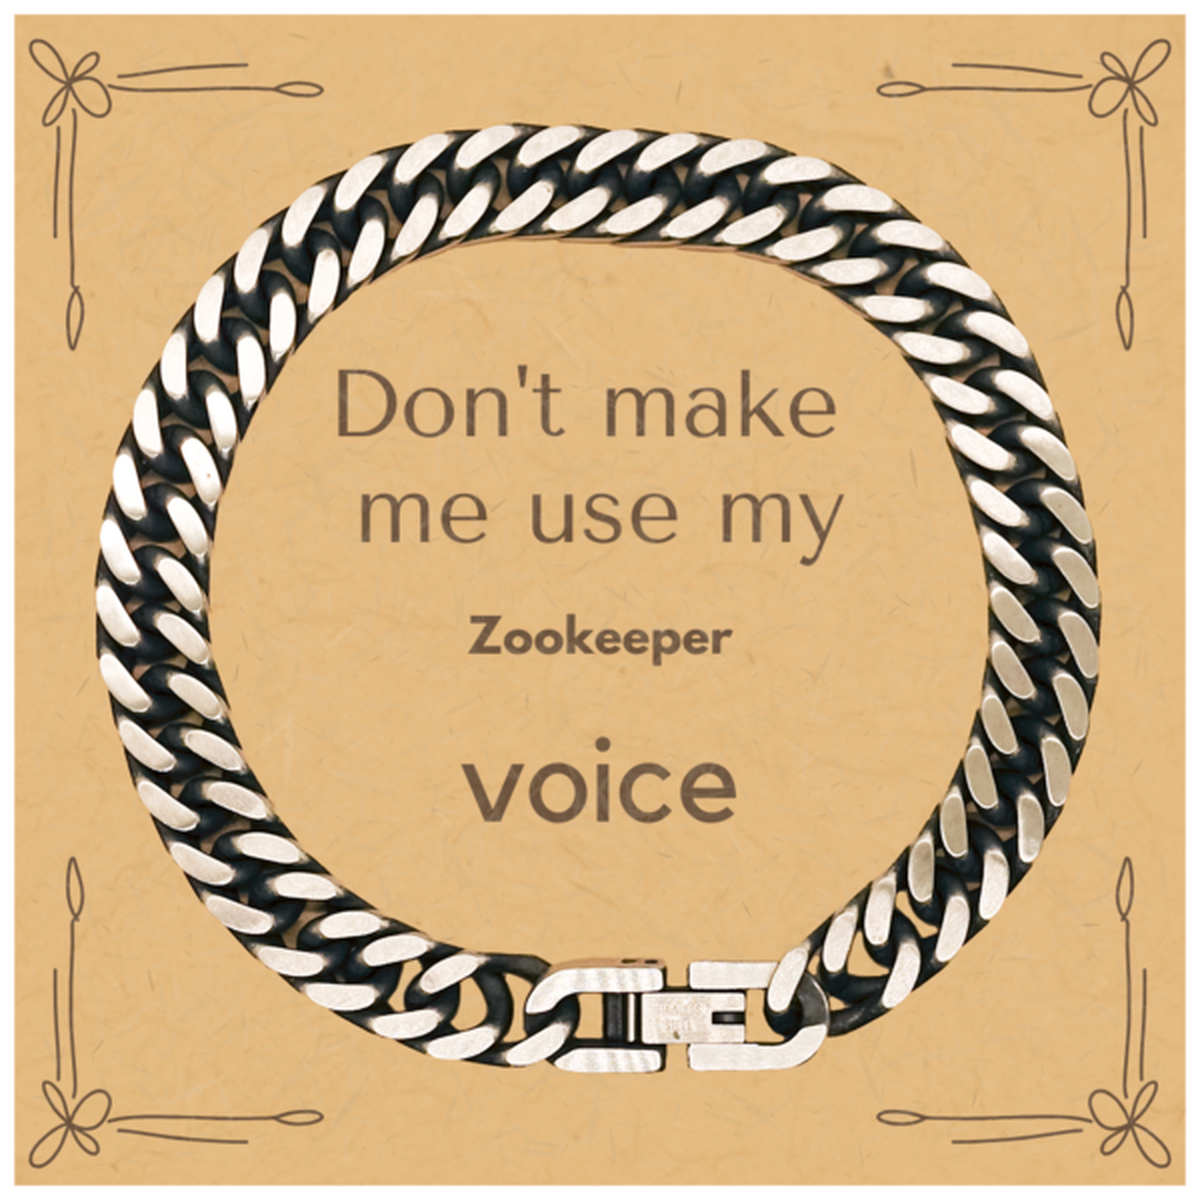 Don't make me use my Zookeeper voice, Sarcasm Zookeeper Card Gifts, Christmas Zookeeper Cuban Link Chain Bracelet Birthday Unique Gifts For Zookeeper Coworkers, Men, Women, Colleague, Friends